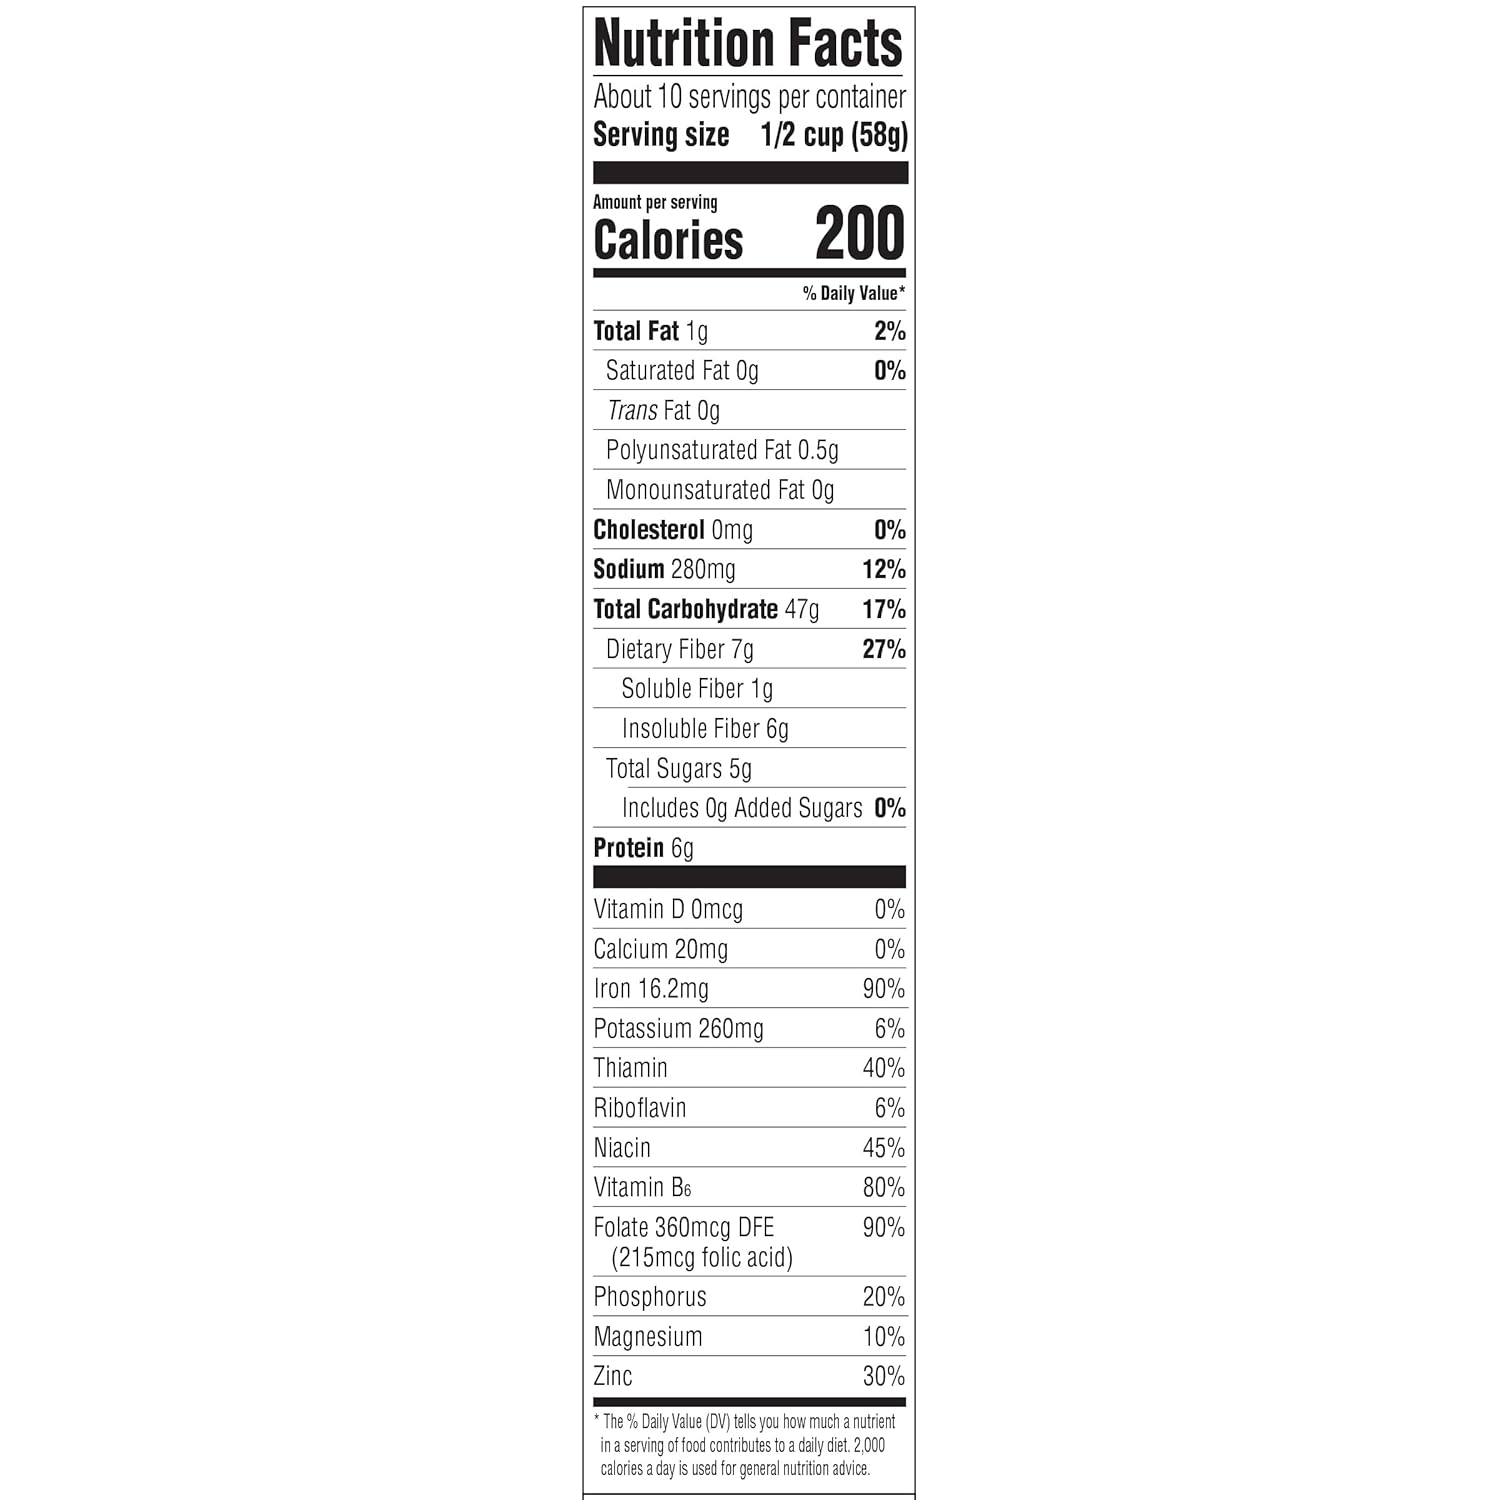 Grape Nuts Original Breakfast Cereal, Crunchy Whole Grain Wheat and Barley Cereal, Non-GMO Project Verified, 20.5 OZ Box